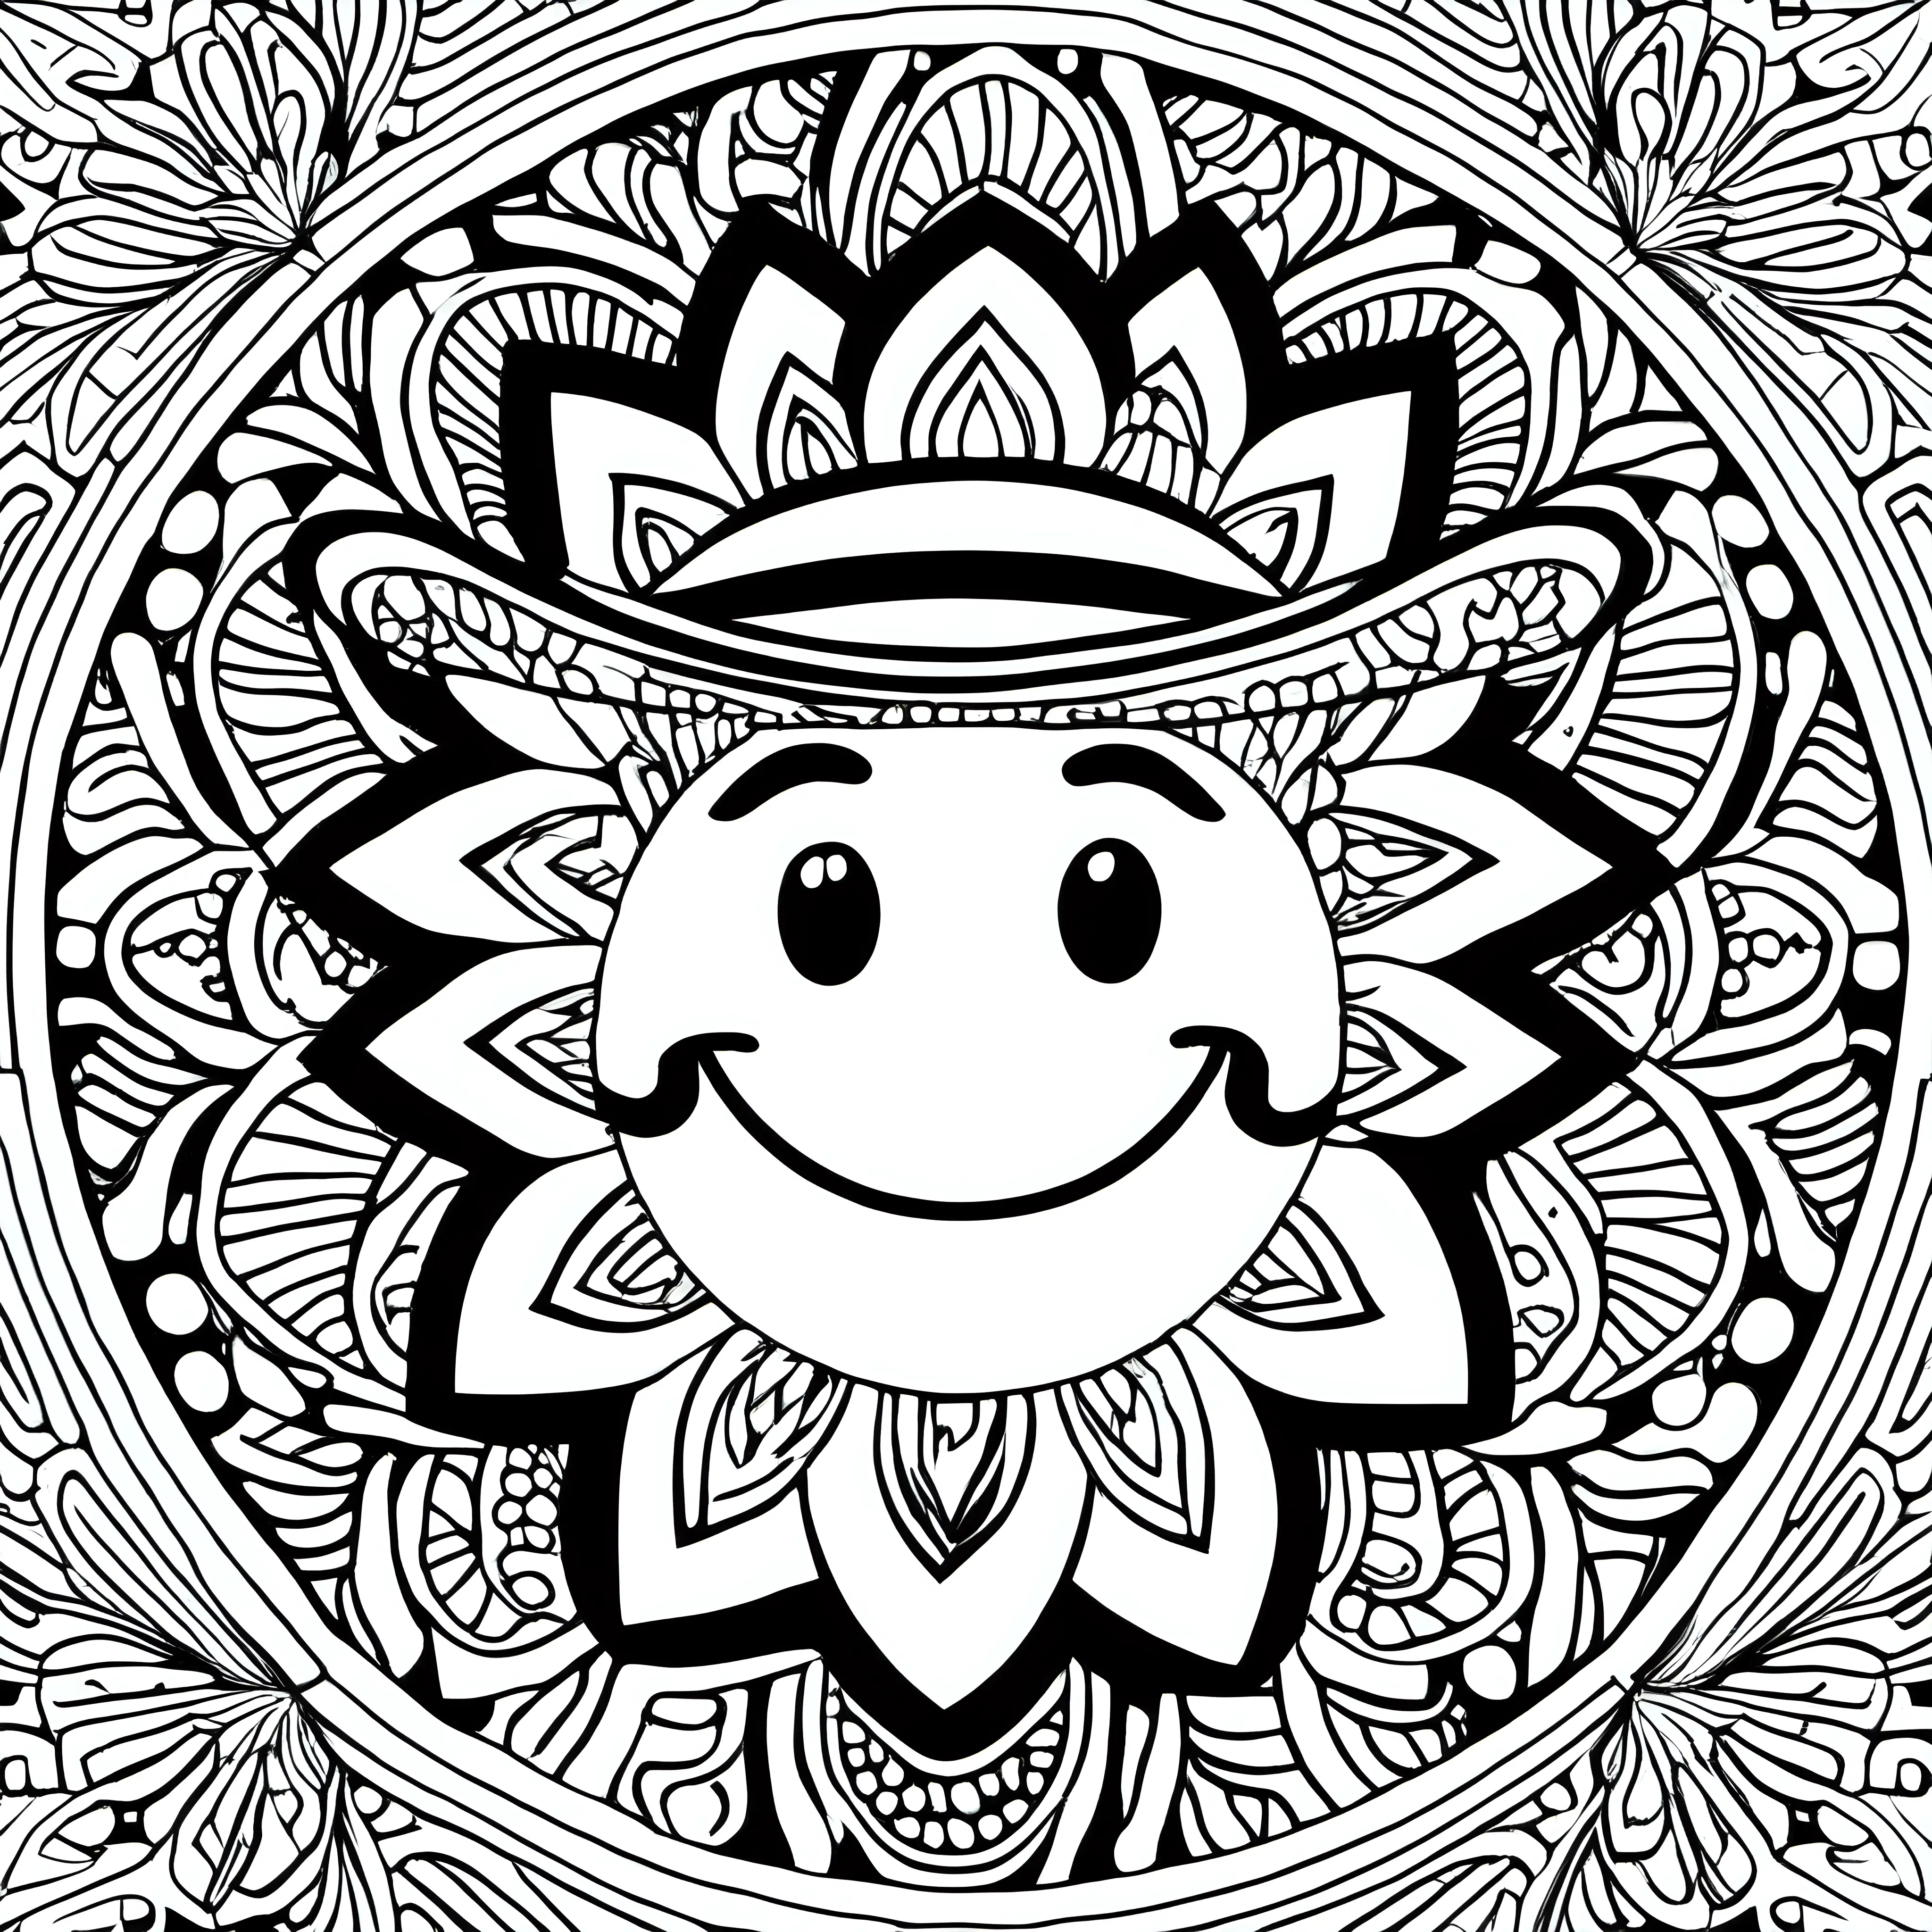 Joyful Face with Hat Mandala Relaxing Coloring Activity for All Ages